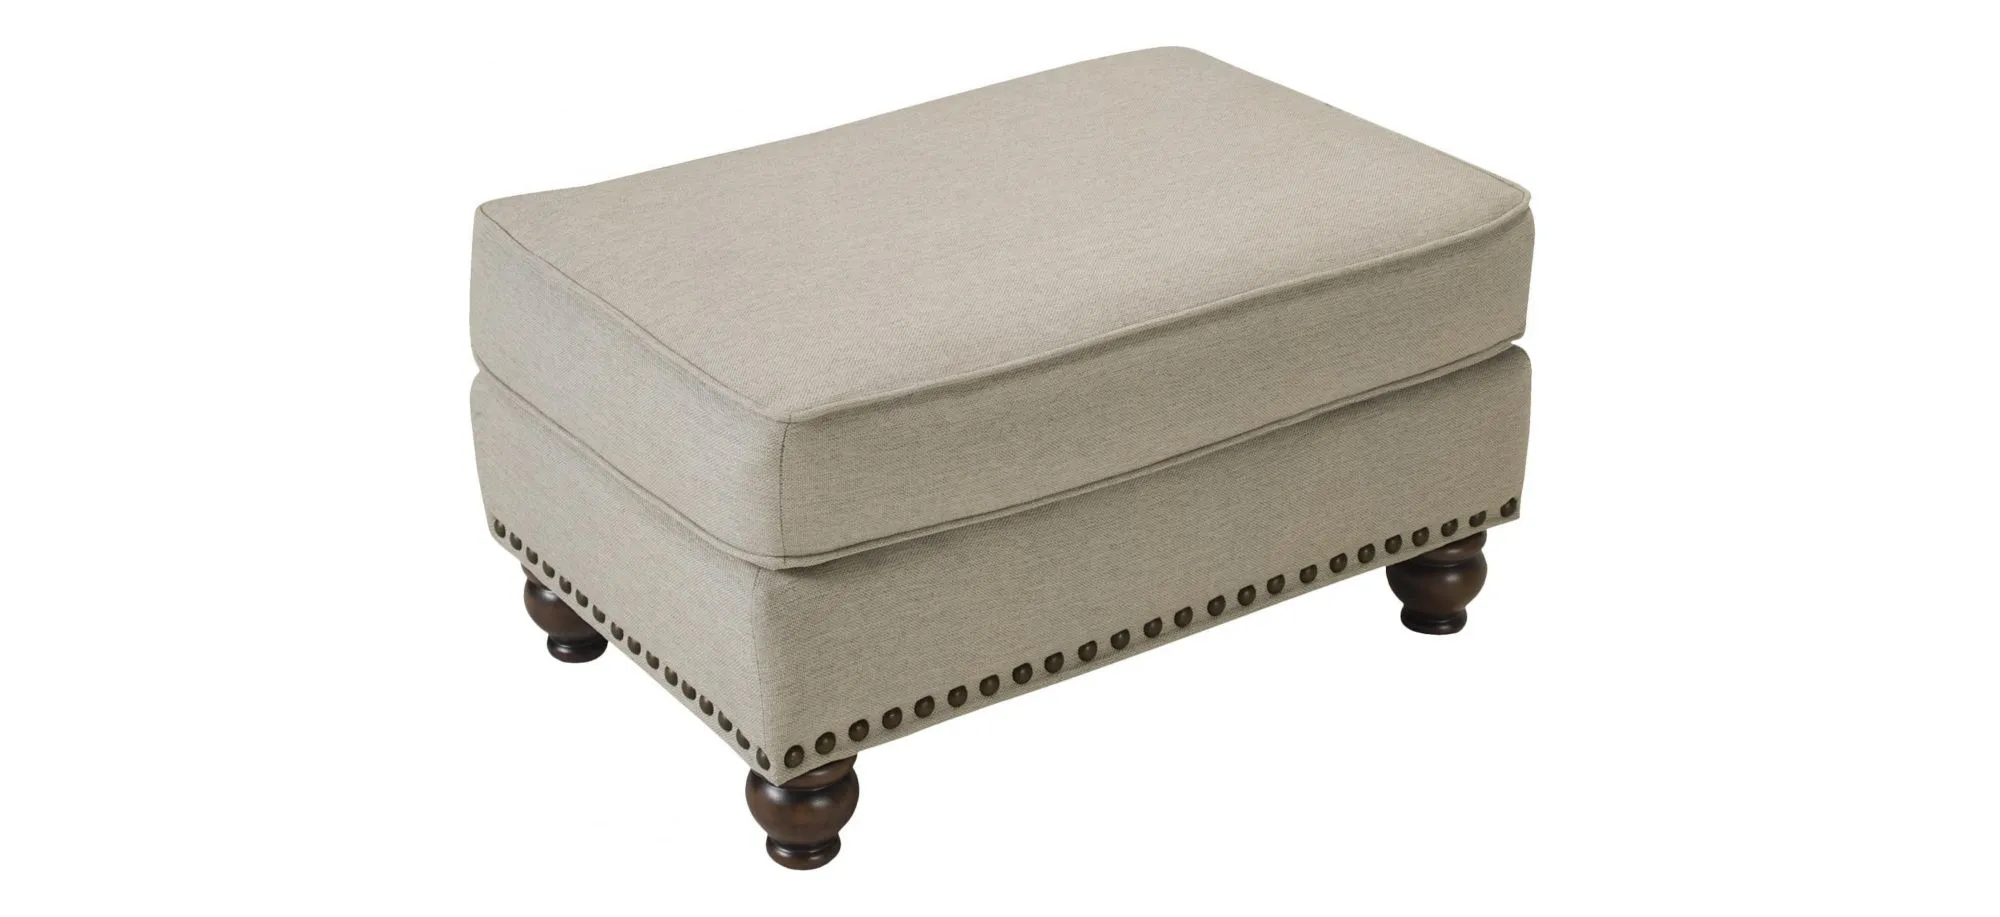 Corliss Ottoman in Oatmeal / Walnut by Fusion Furniture